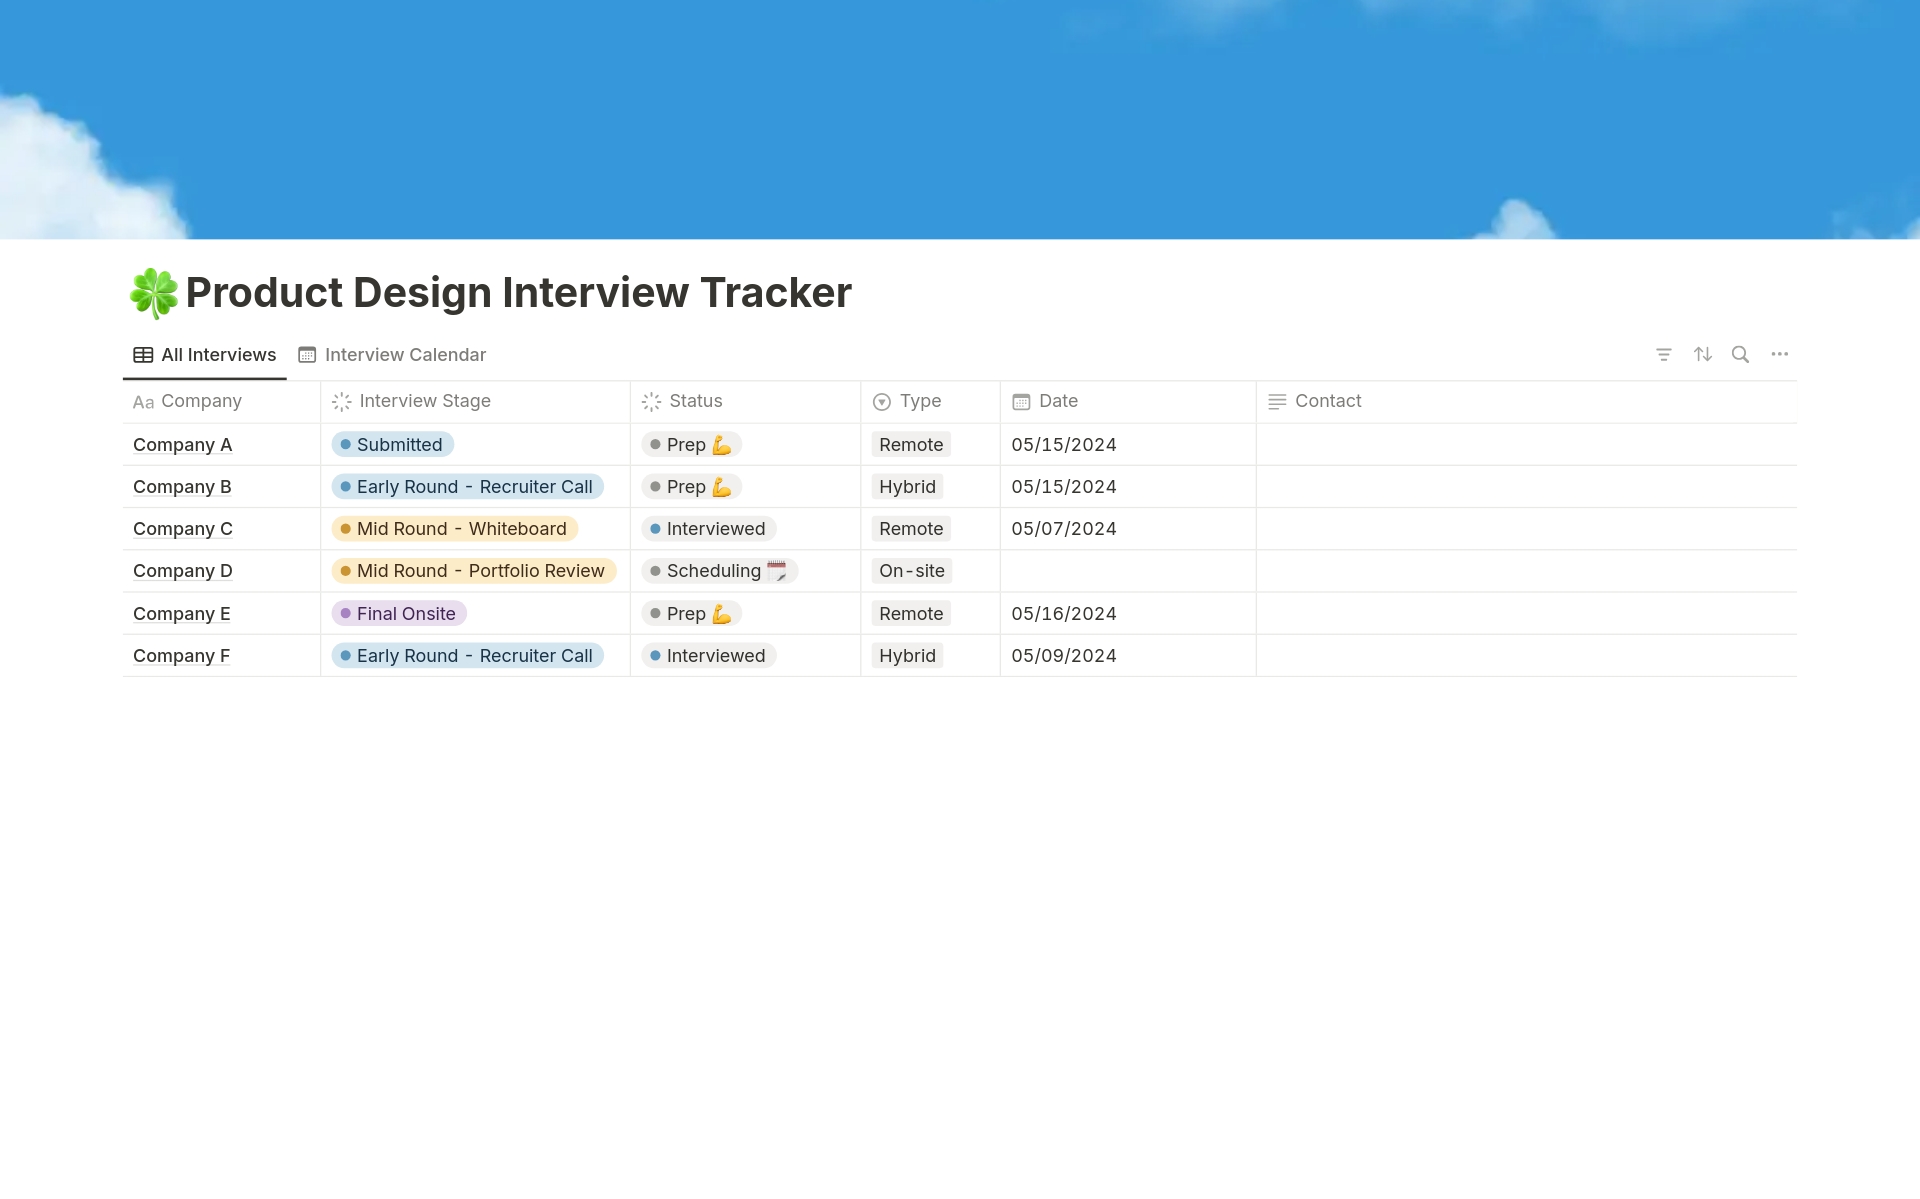 A customizable Notion template designed to streamline tracking all your product design interviews in one page